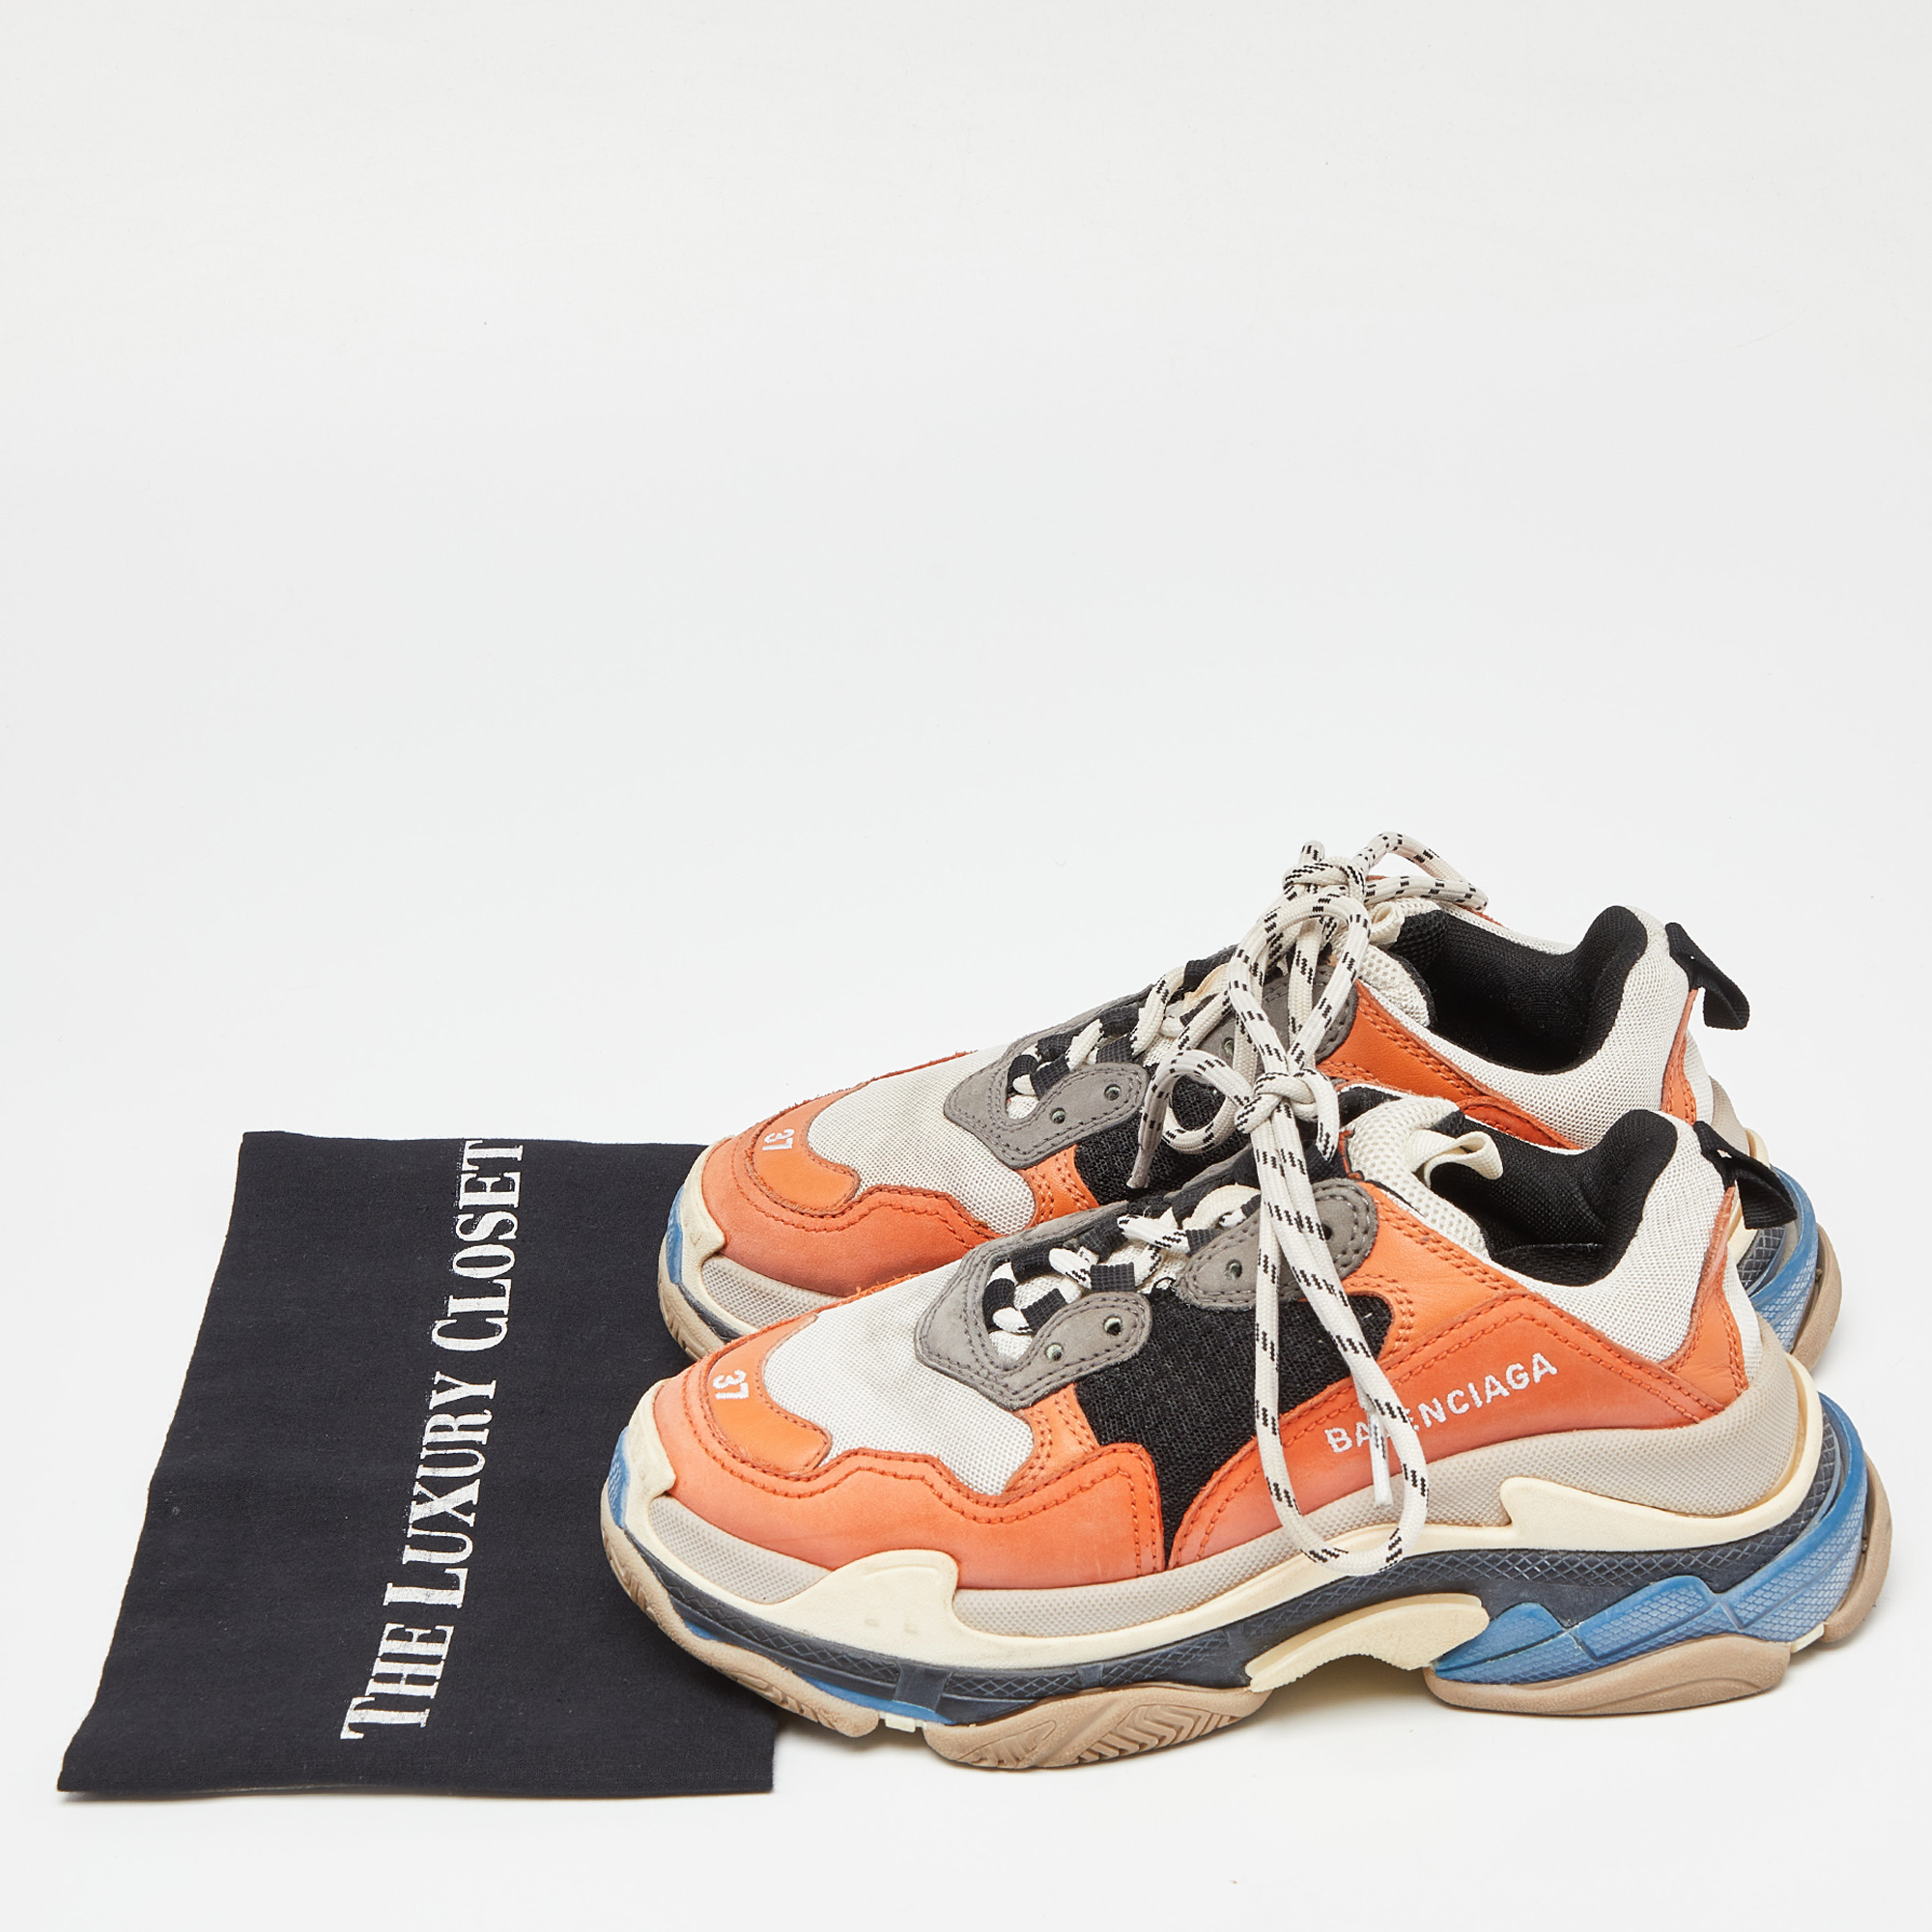 Balenciaga Tricolor Leather And Mesh Triple S Sneakers Size 37